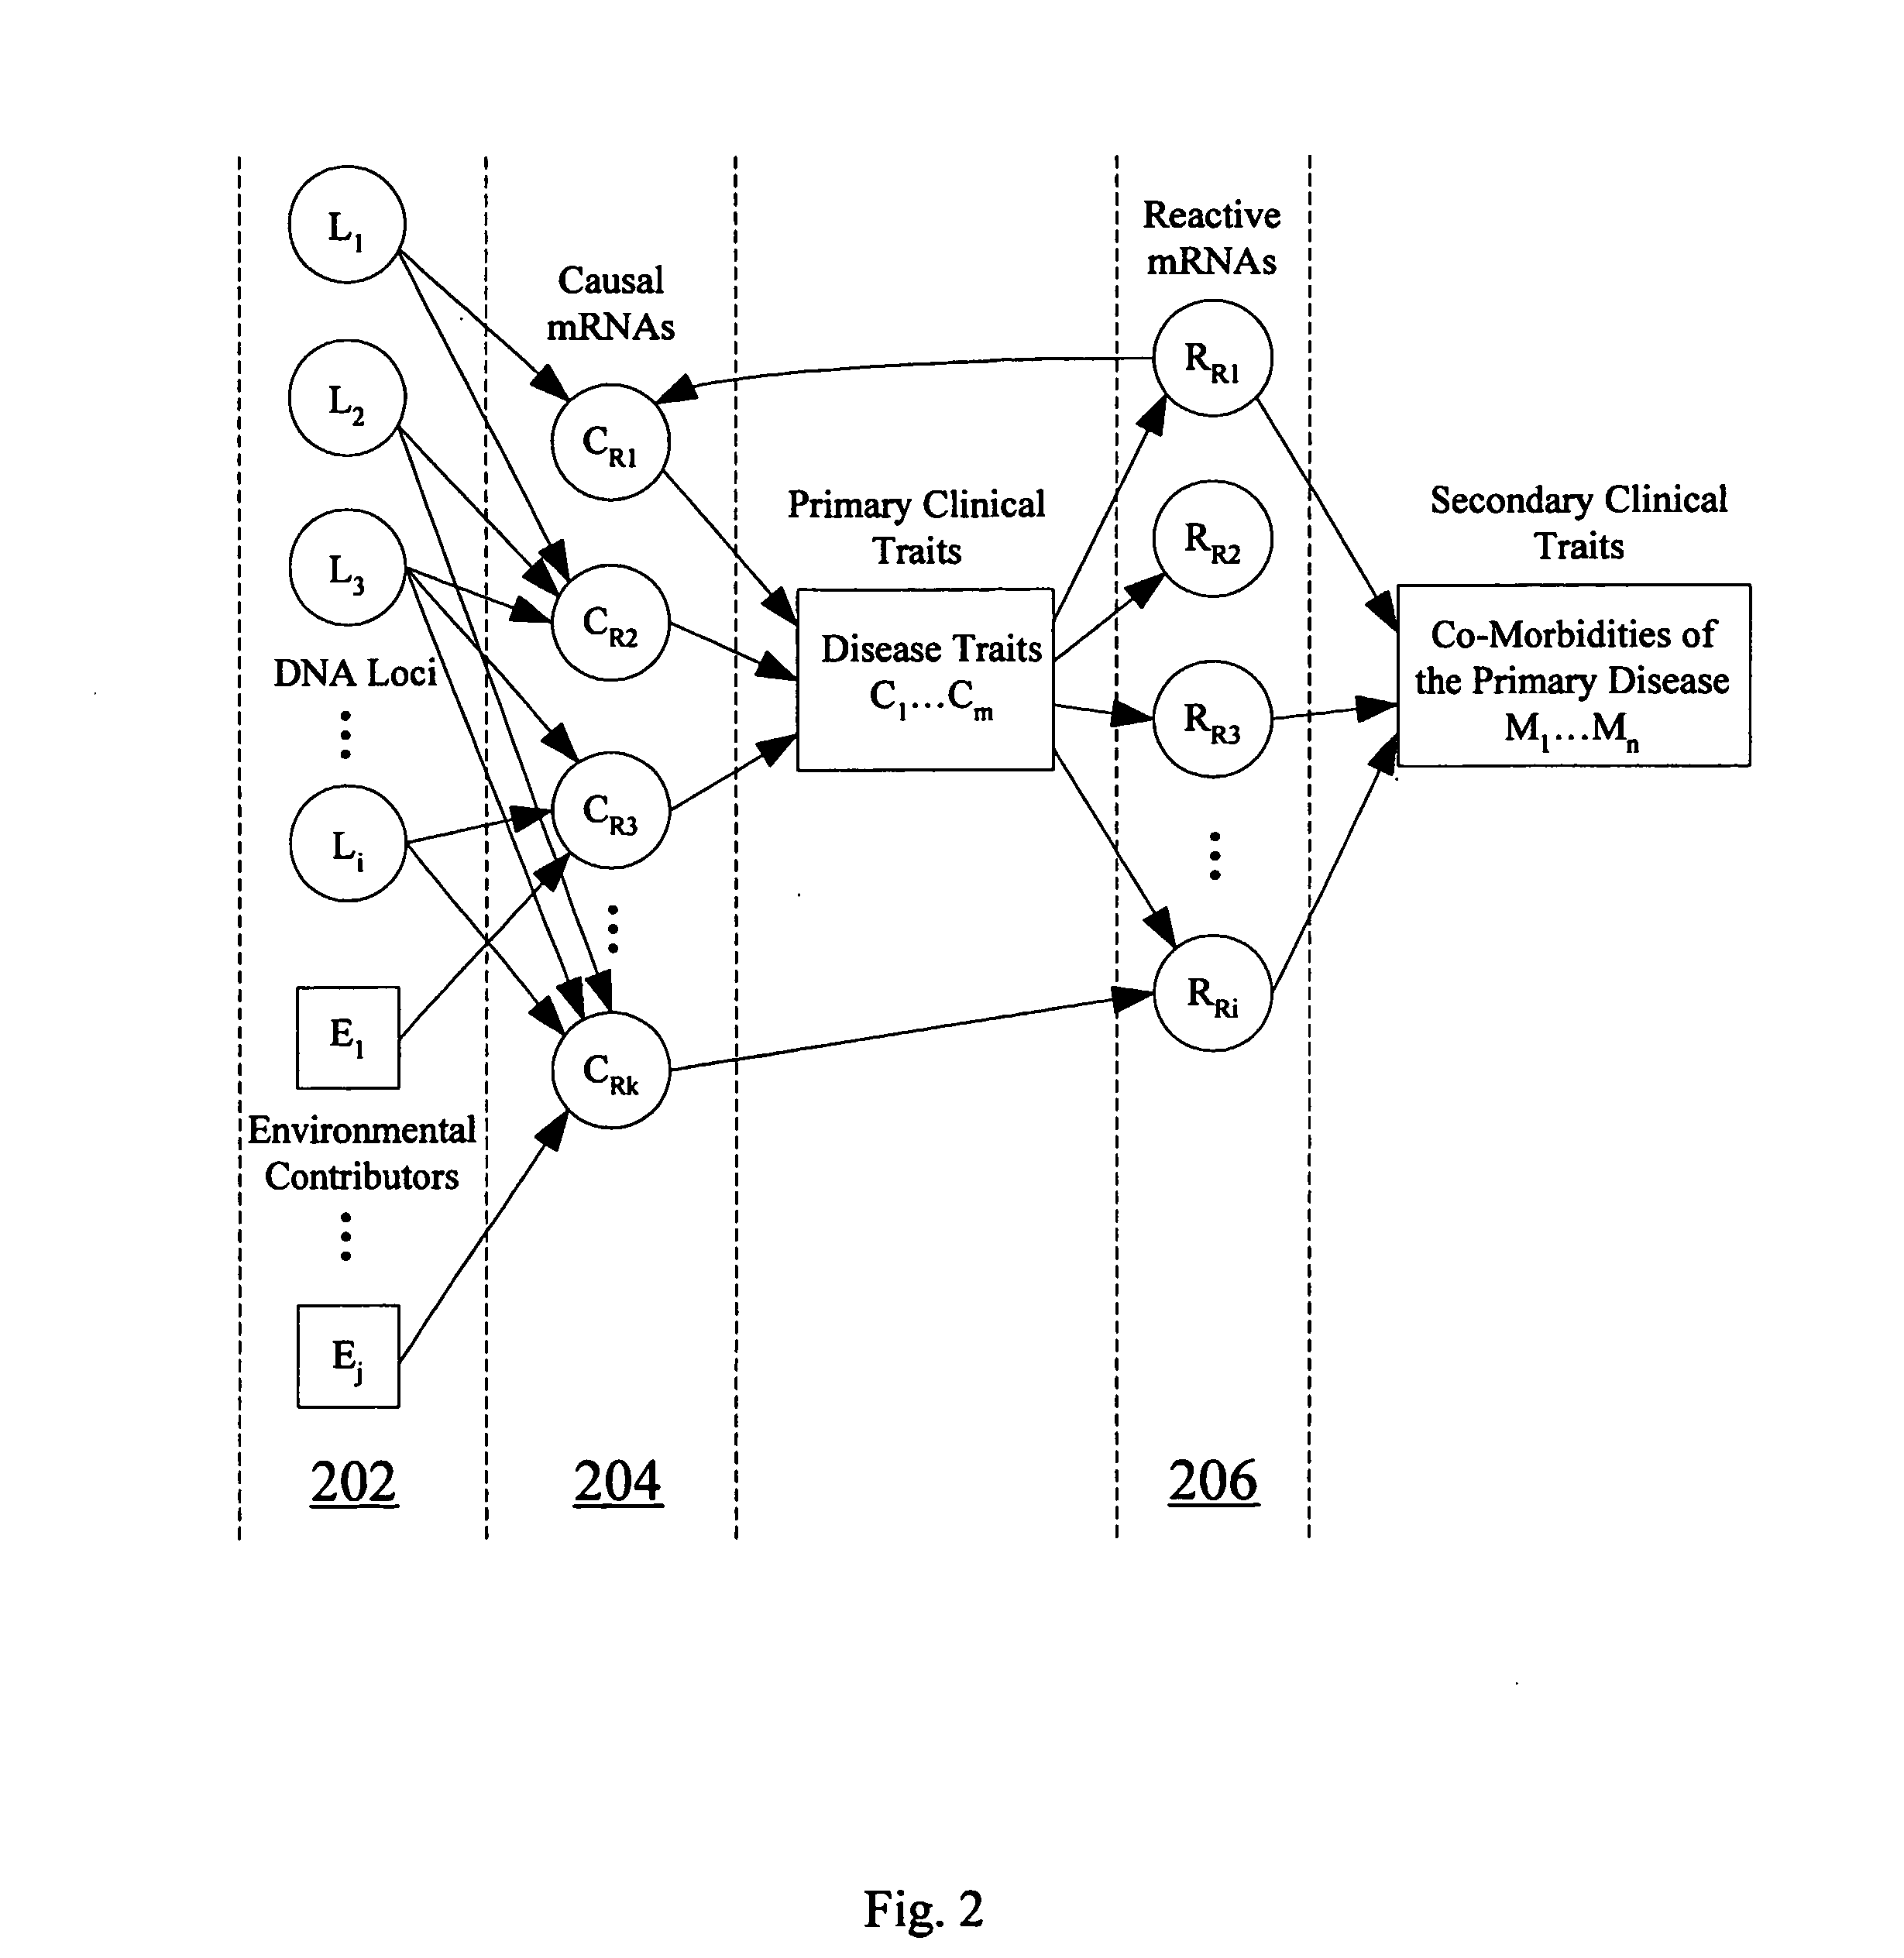 Computer systems and methods for inferring casuality from cellular constituent abundance data